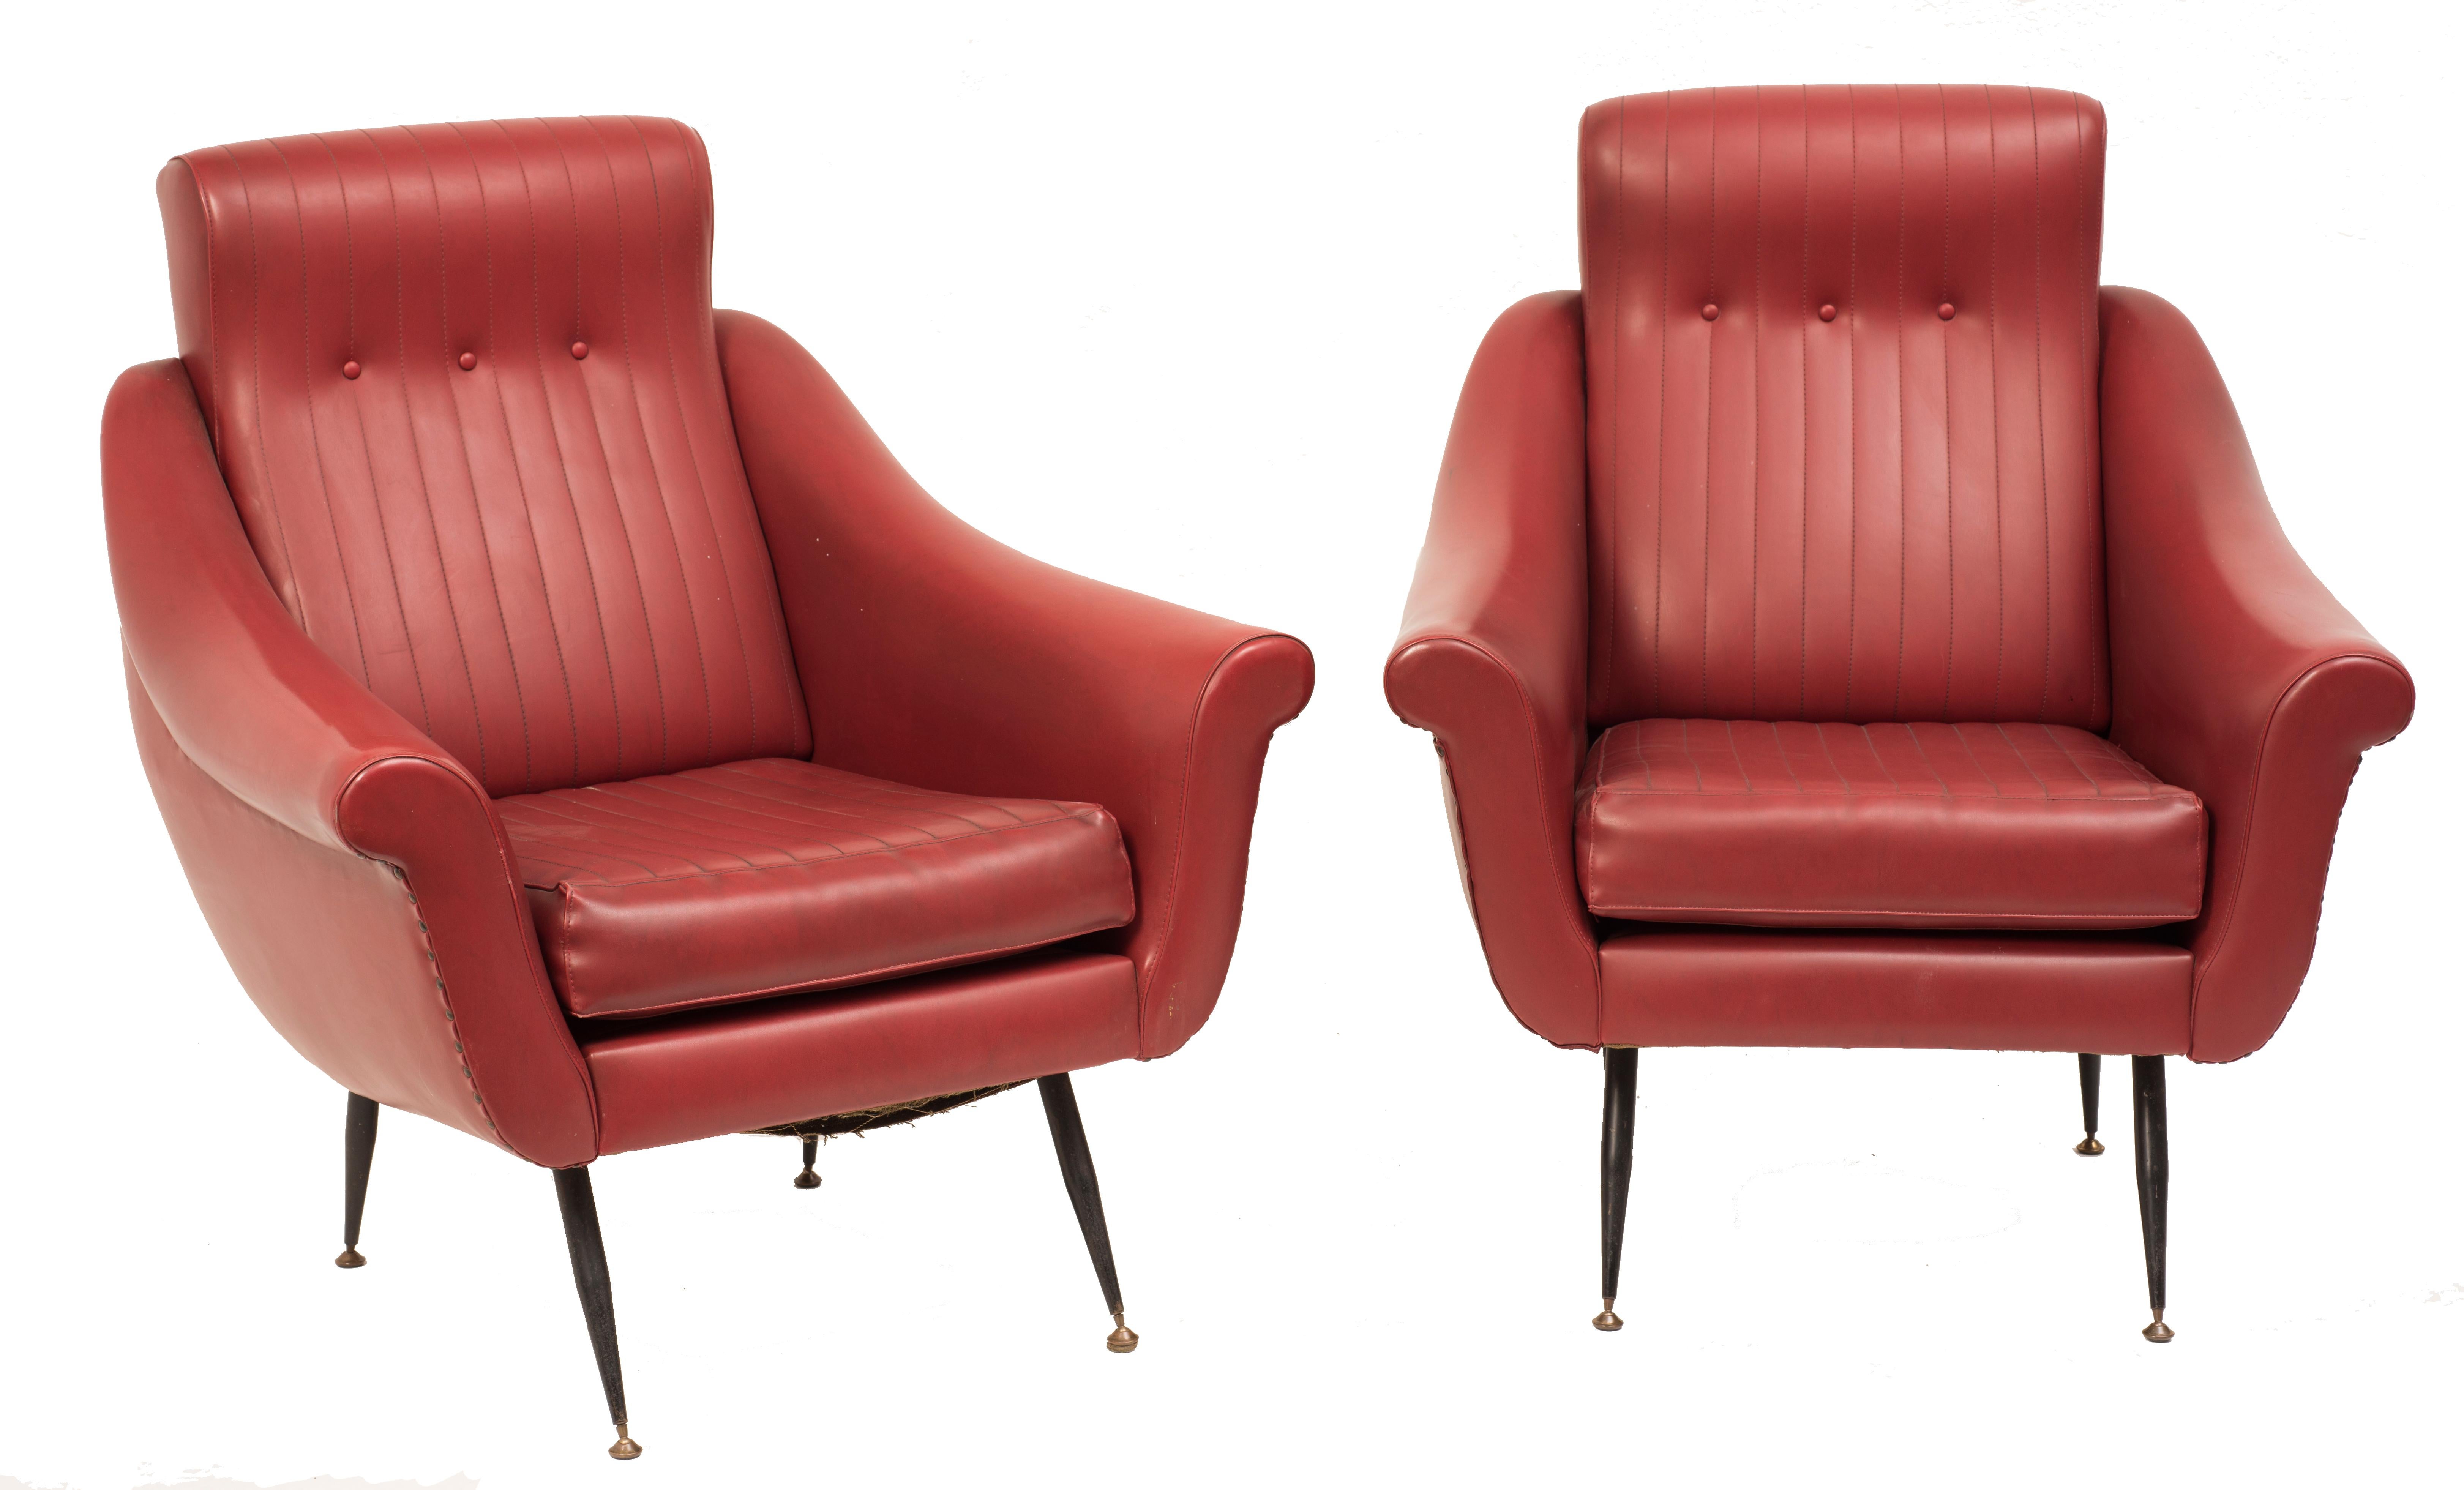 Pair of armchairs with padding upholstered with skai, structure in painted metal and extremities in brass.

Shipped from Italy. Under existing legislation, any item in Italy created over 70 years ago by an artist who has died requires a licence for